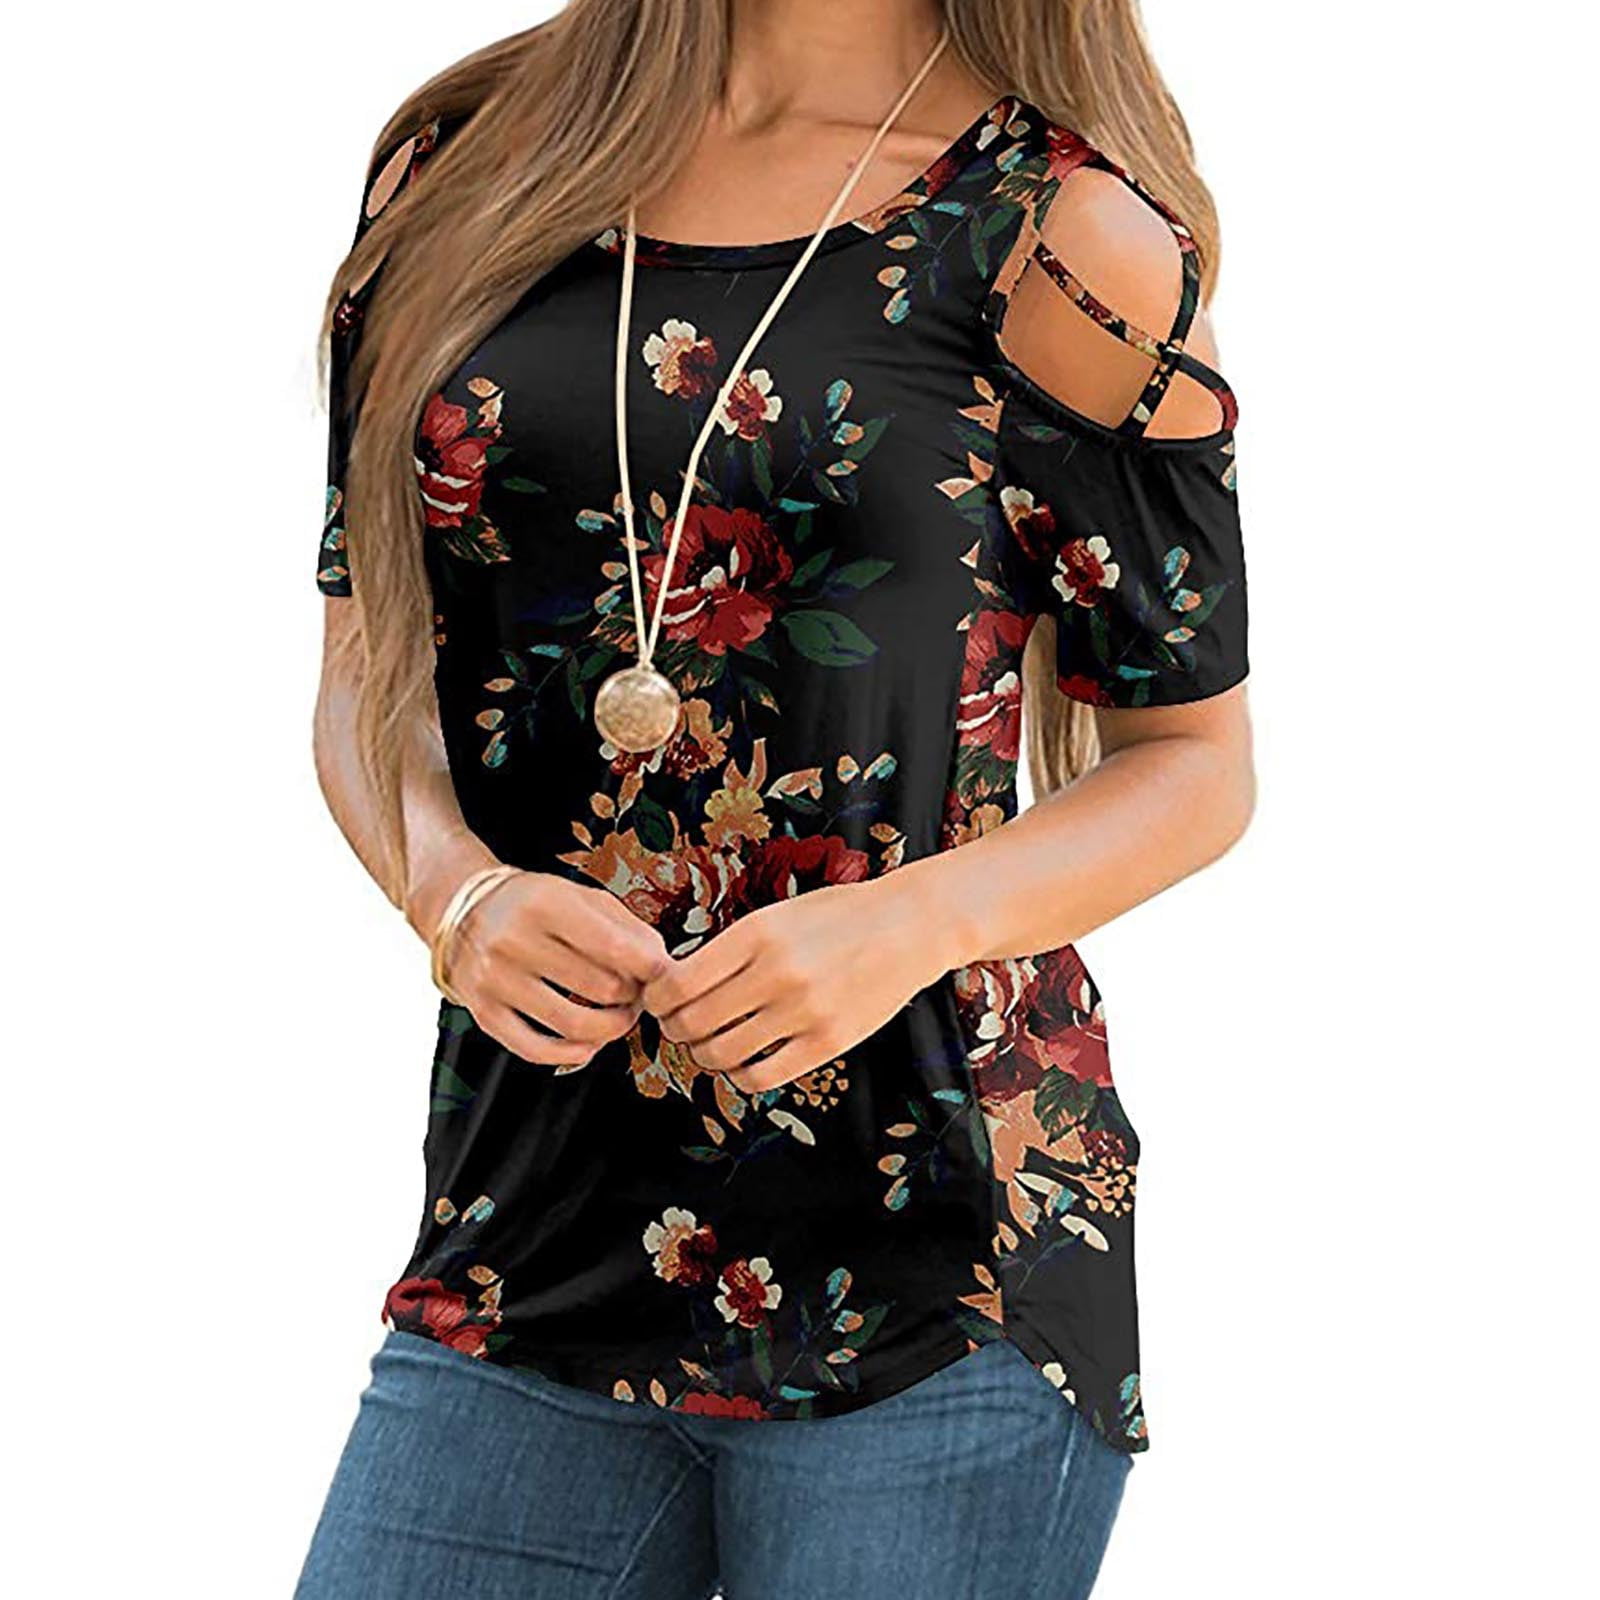 Womens Summer Tops,Women Casual Fashion Printed Zipper Shirts Strap Cold Shoulder Tops Short Sleeved V-Neck Tee 